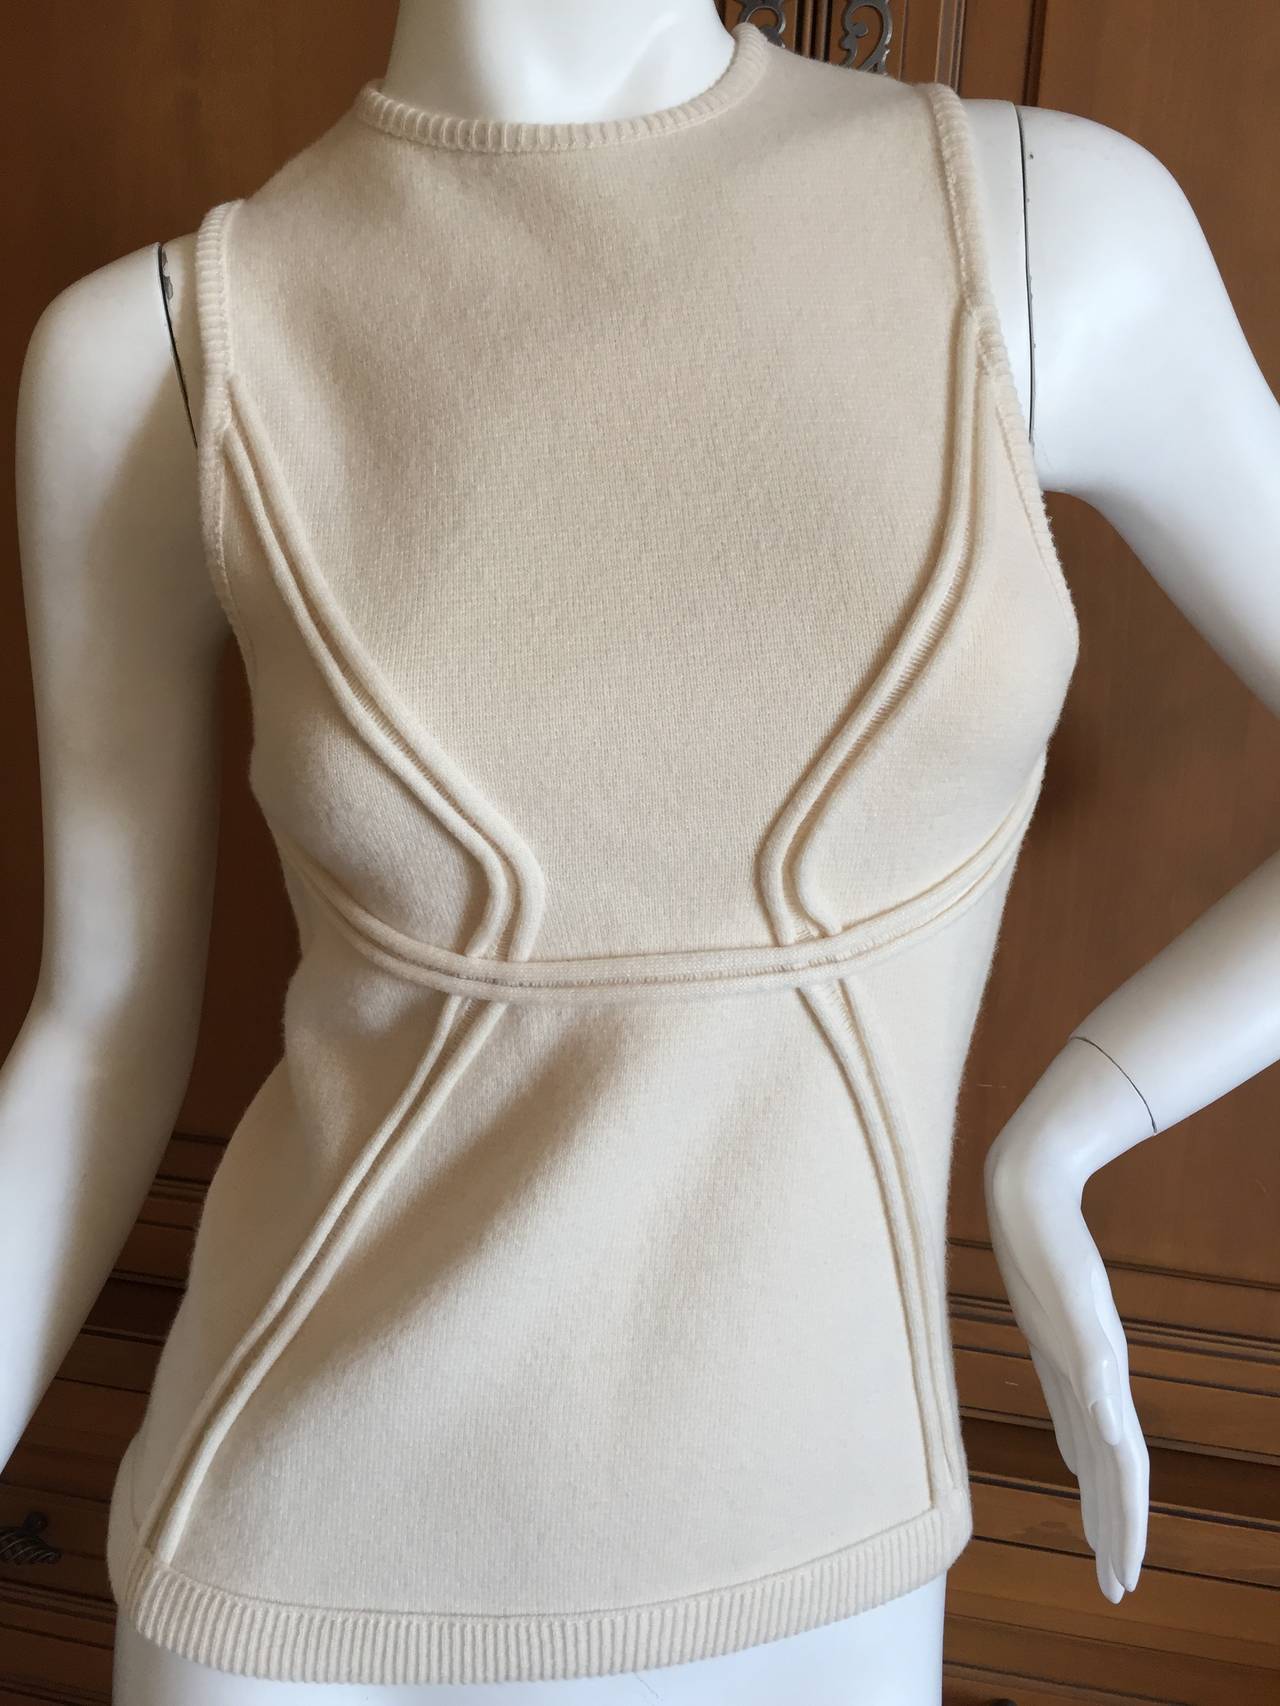 Wonderful cashmere knit top from Chado Ralph Rucci.
With his signature style, the details are pure Ralph.
The size tag is no longer on this, I estimate it to be size Small.
Bust 32